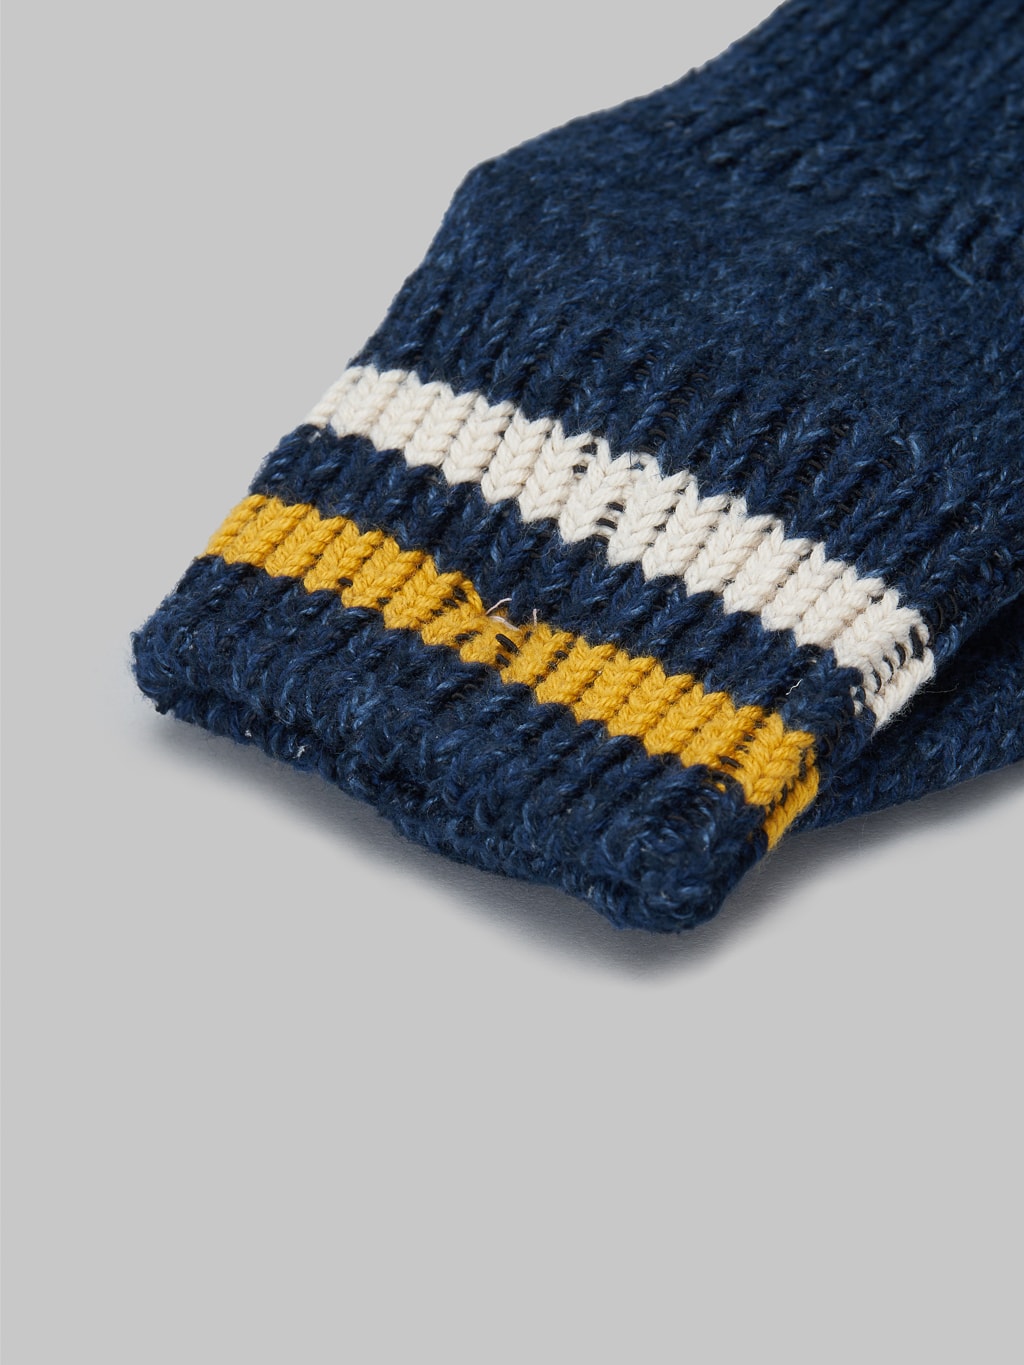 UES Sneakers Socks Navy and Yellow hem cotton 